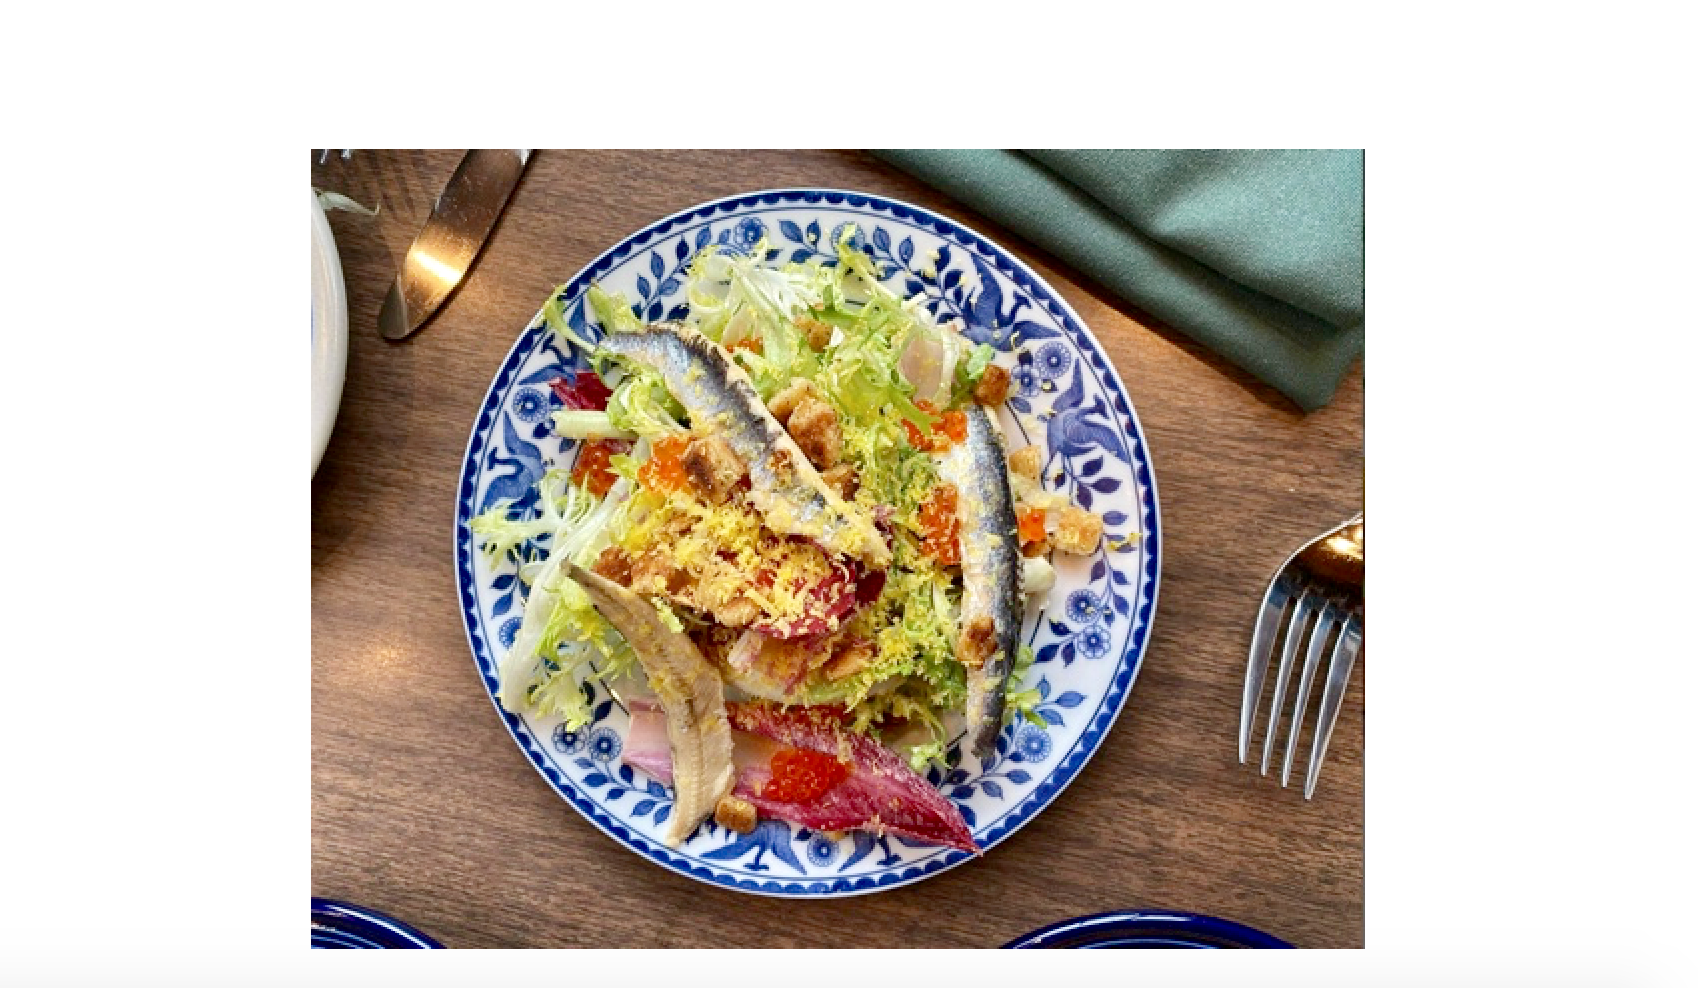 A smoked fish salad from Edith’s in Brooklyn, whose all-day dining menu features twists on Jewish staples. (From Instagram)